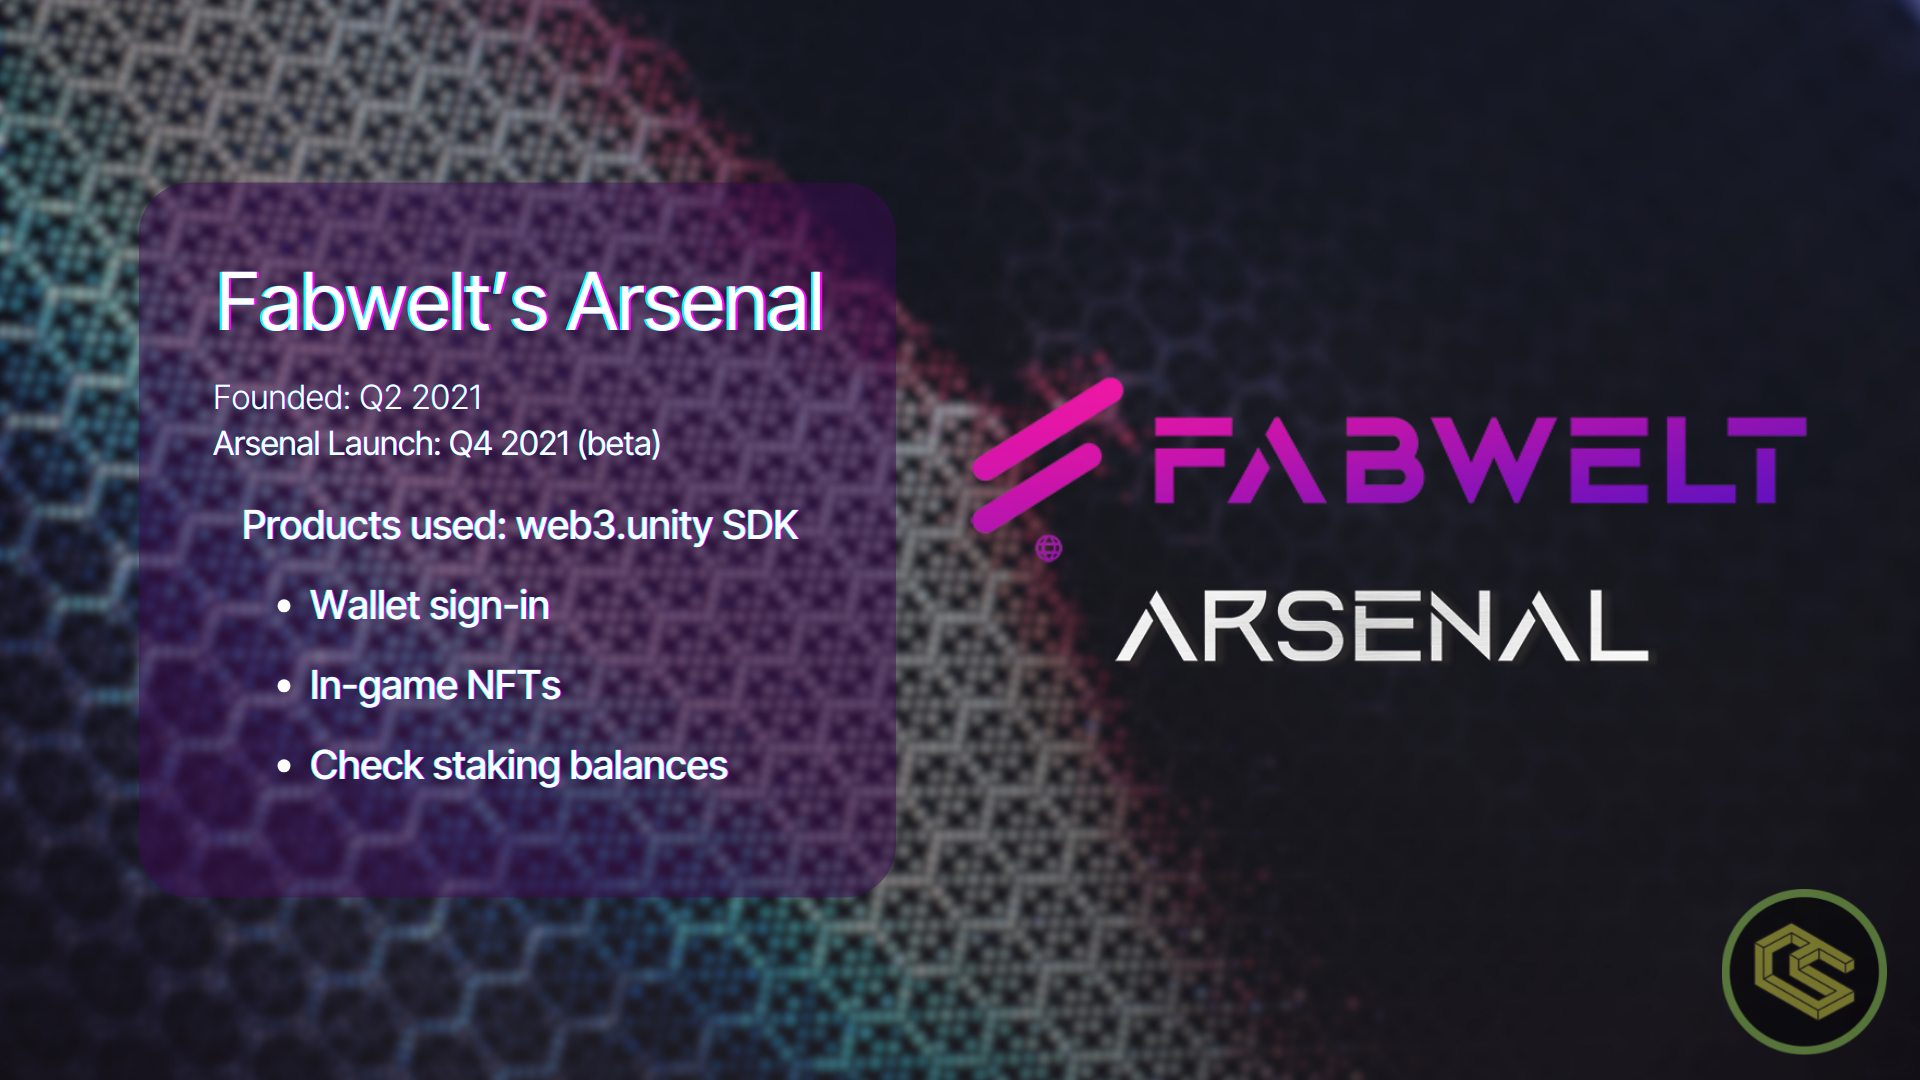 Fabwelt's Arsenal: Founded Q2 2021. Launched Q4 2021. Product's used: web3.unity SDK for wallet sign-in, in-game NFTs, Check staking balances.